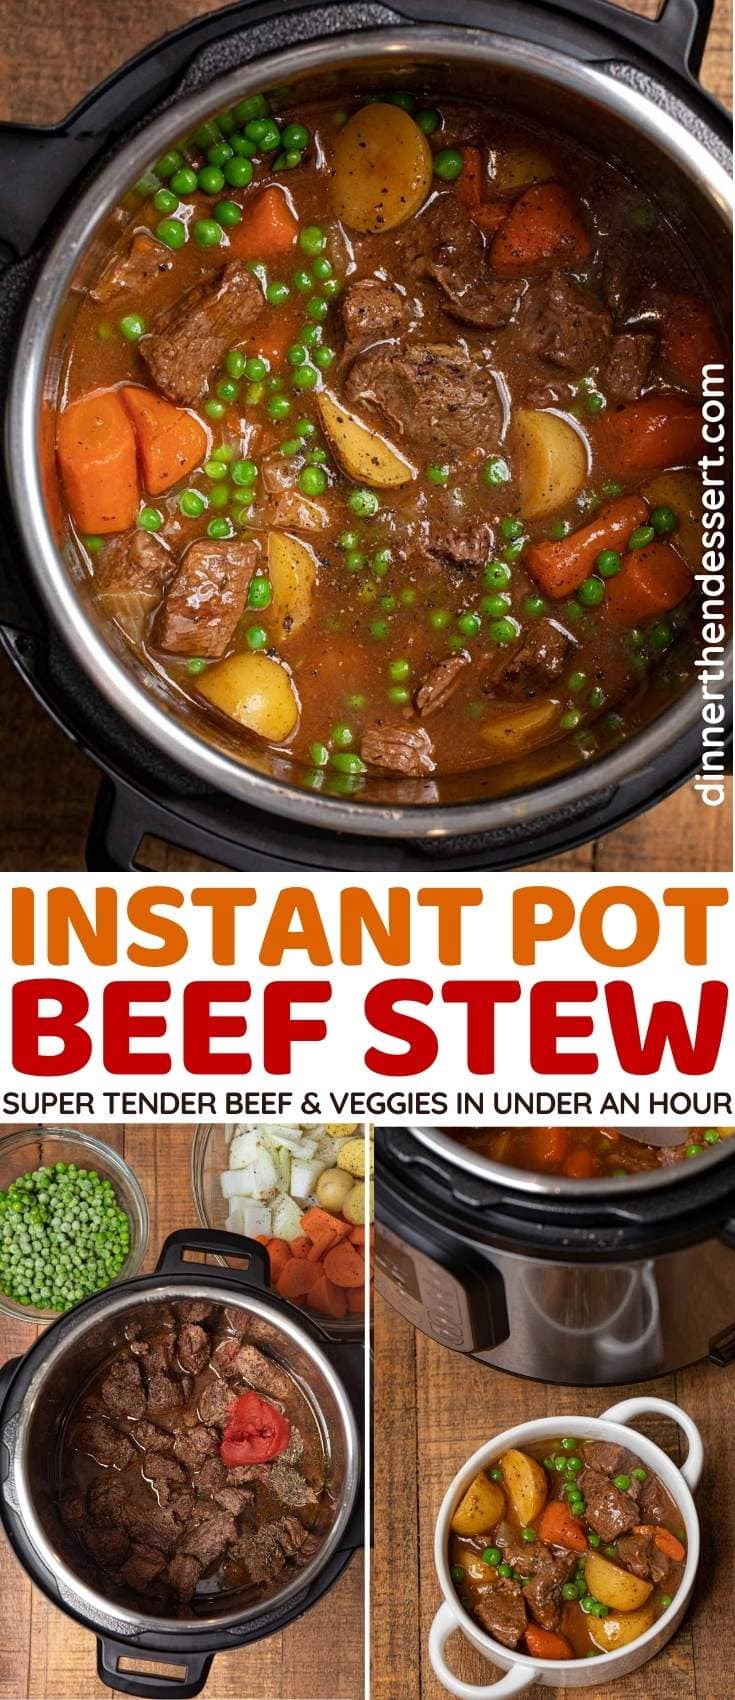 Instant Pot Beef Stew collage